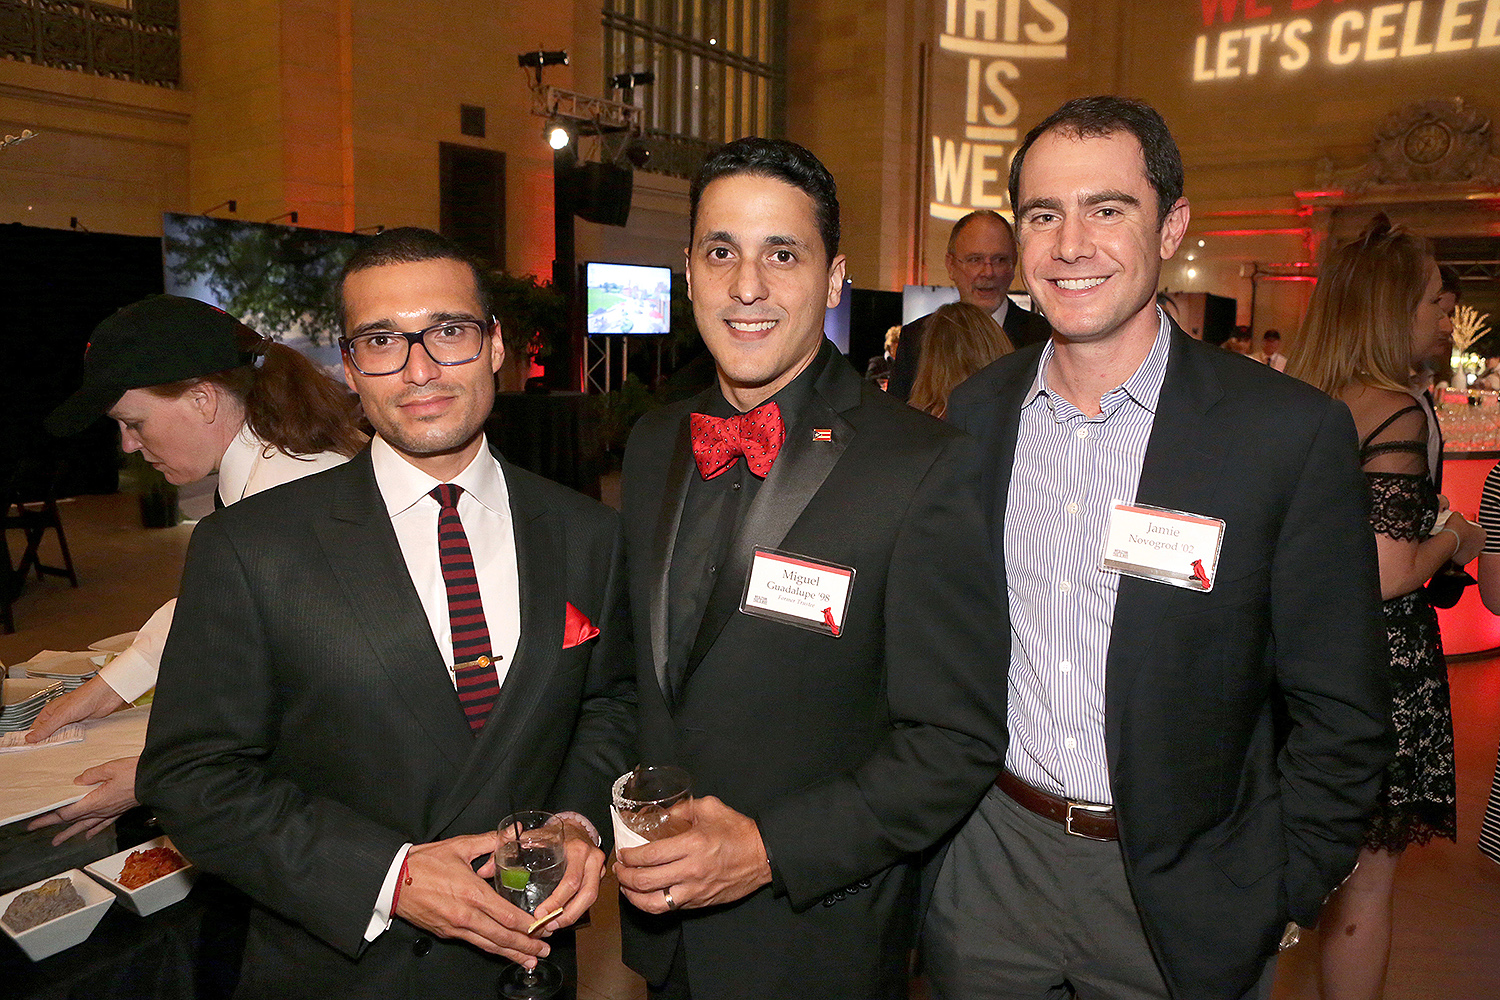 Wesleyan University and Campaign Chair John Usdan ’80 P’15, P’18, P’18, hosted a THIS IS WHY Campaign Celebration at Grand Central Station, New York, N.Y. on June 16, 2016. (Photo by Robert Adam Mayer)